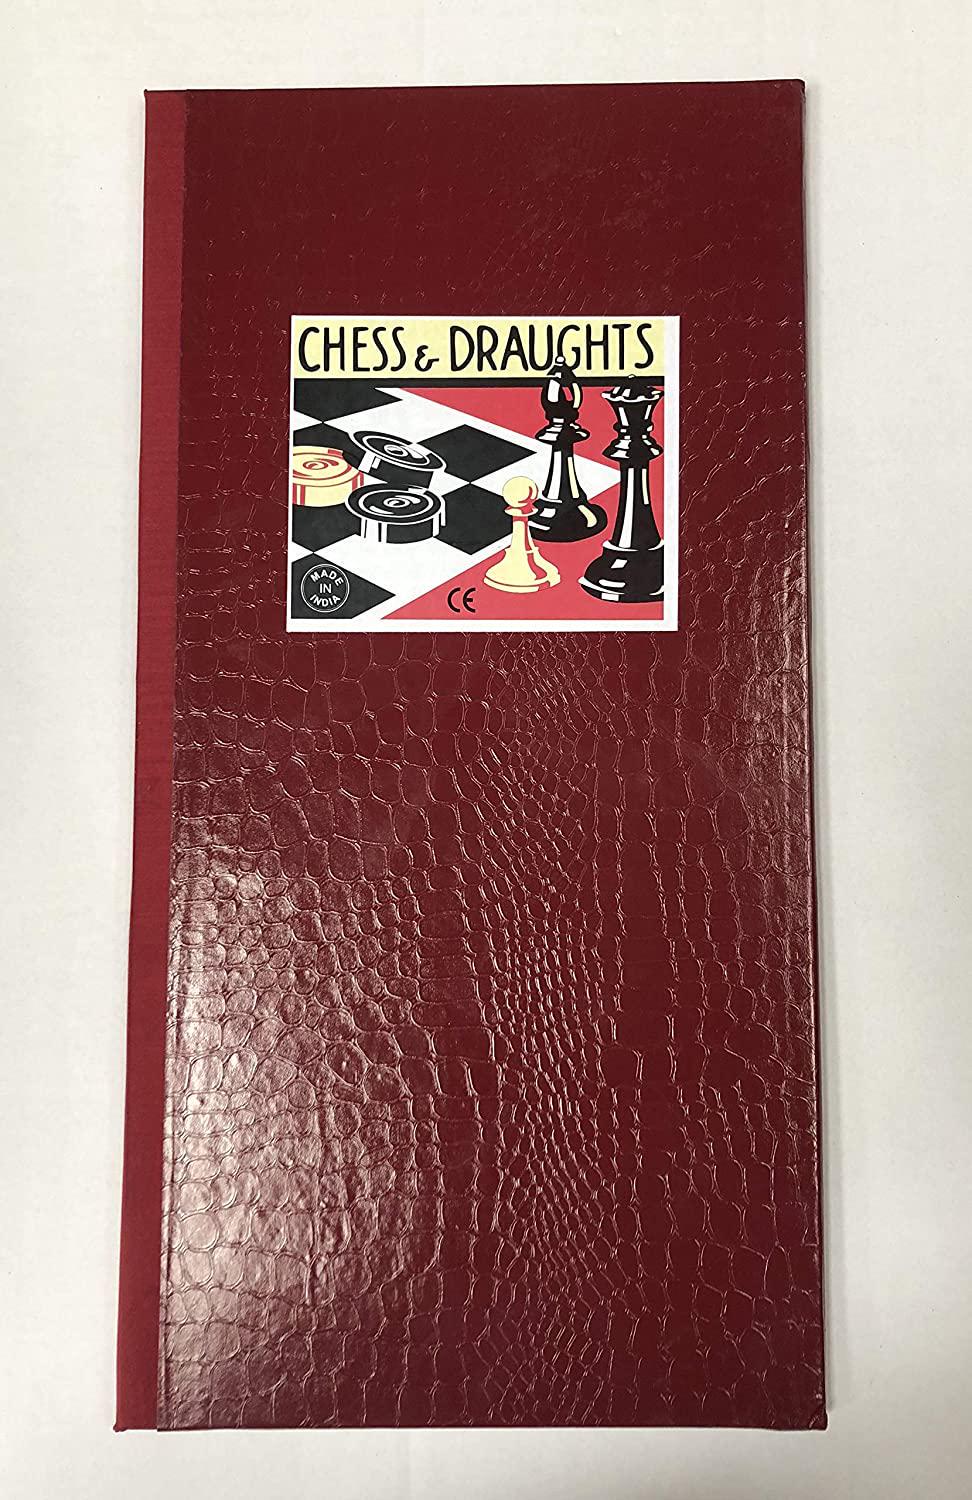 Gamez Galore, Gamez Galore Folding Leatherette Chess and Draughts Board